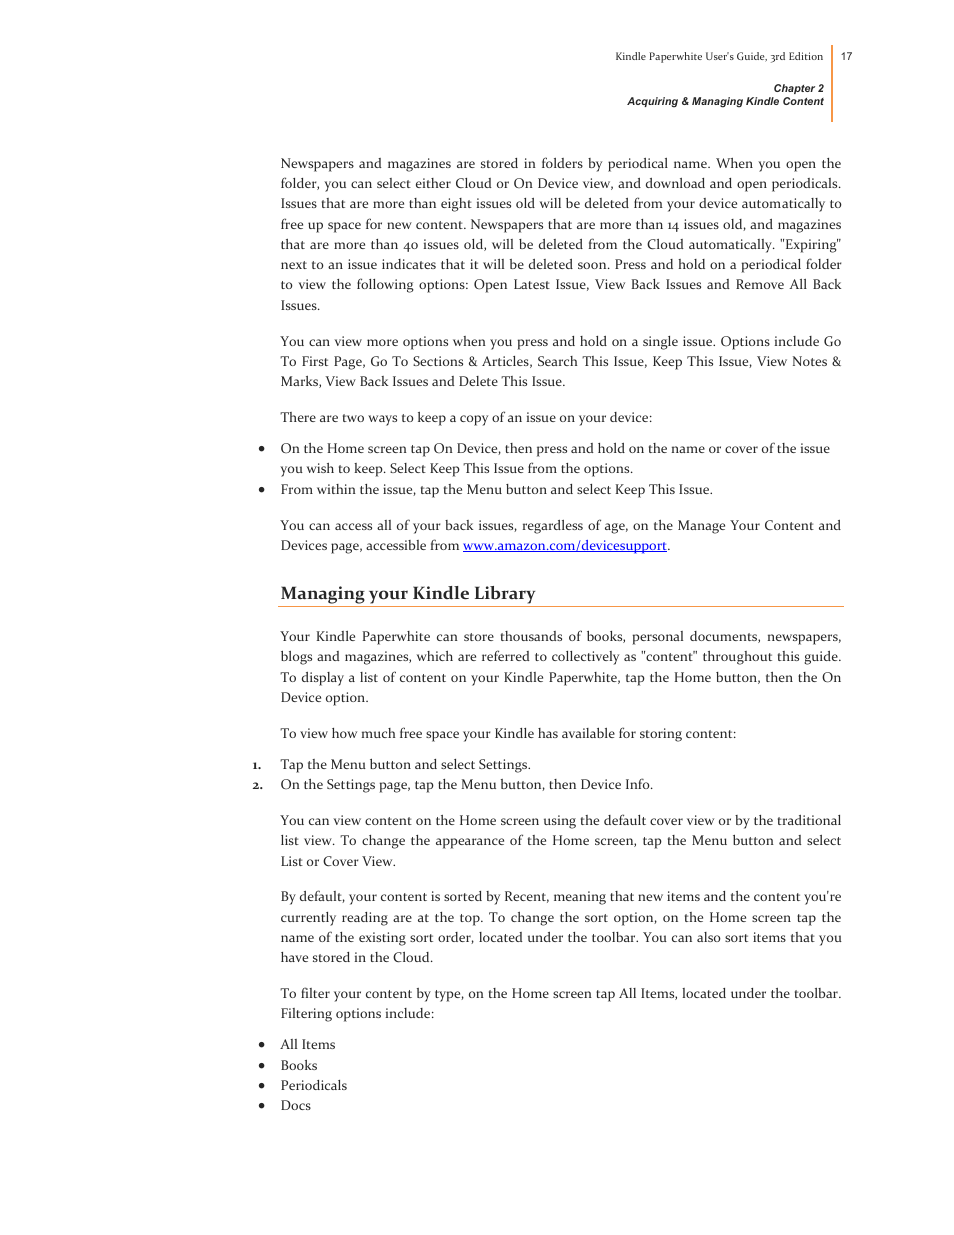 Managing your kindle library | Kindle Paperwhite (2nd Generation) User Manual | Page 17 / 47